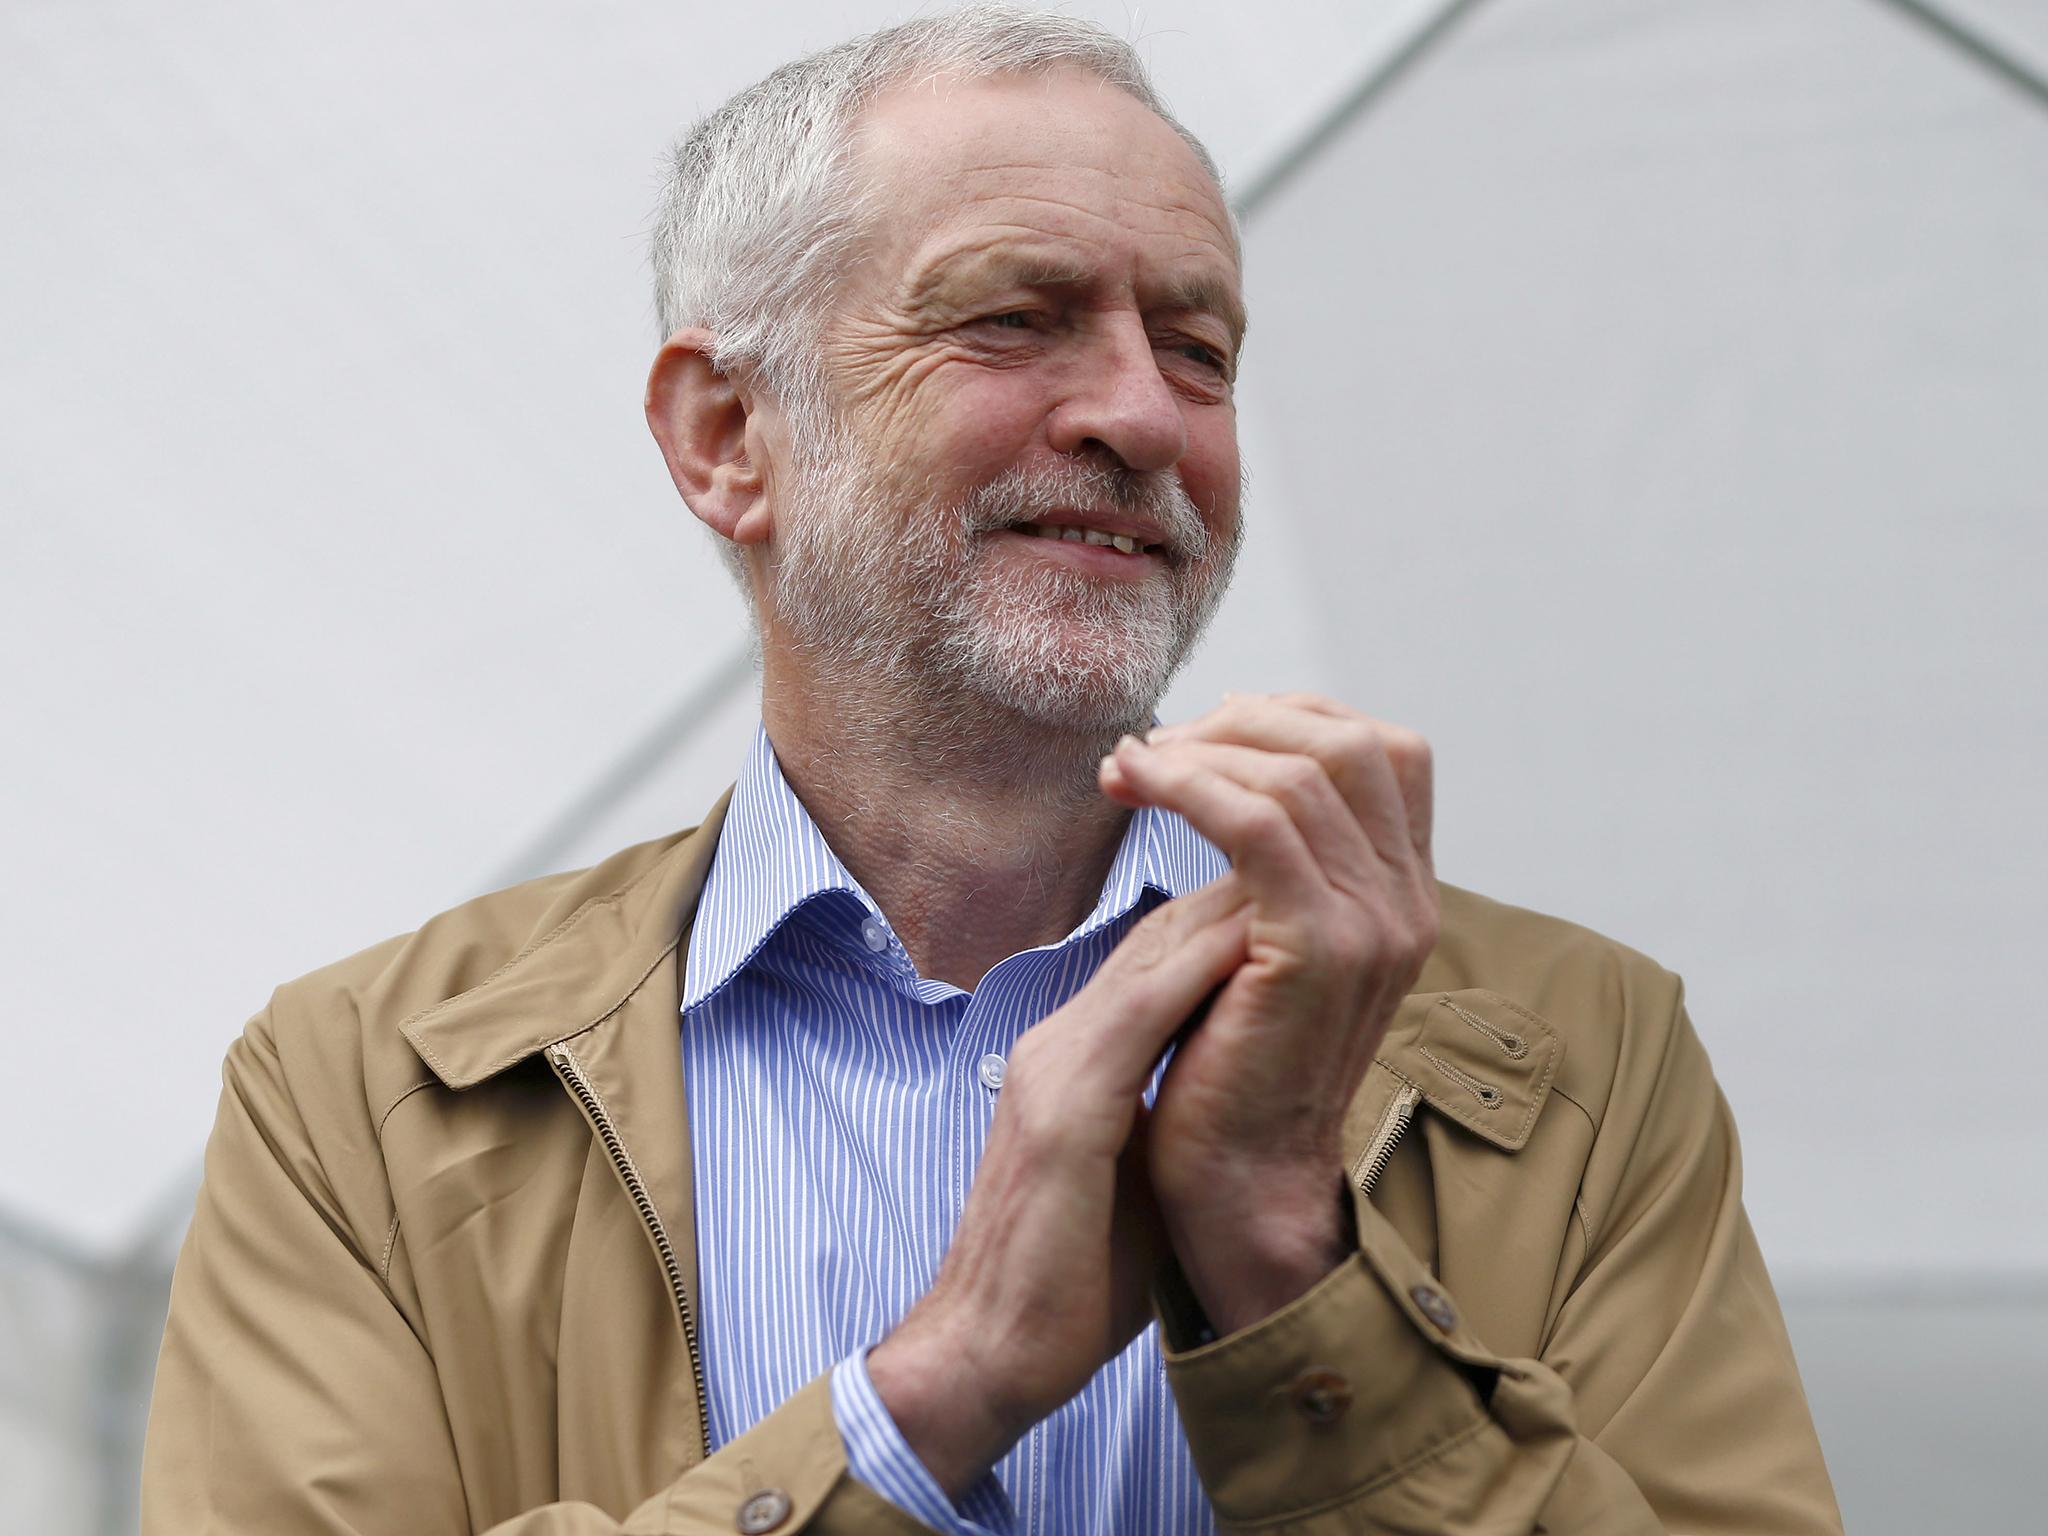 Mr Corbyn insisted he would stay on as Labour leader despite warnings from the Parliamentary Labour Party